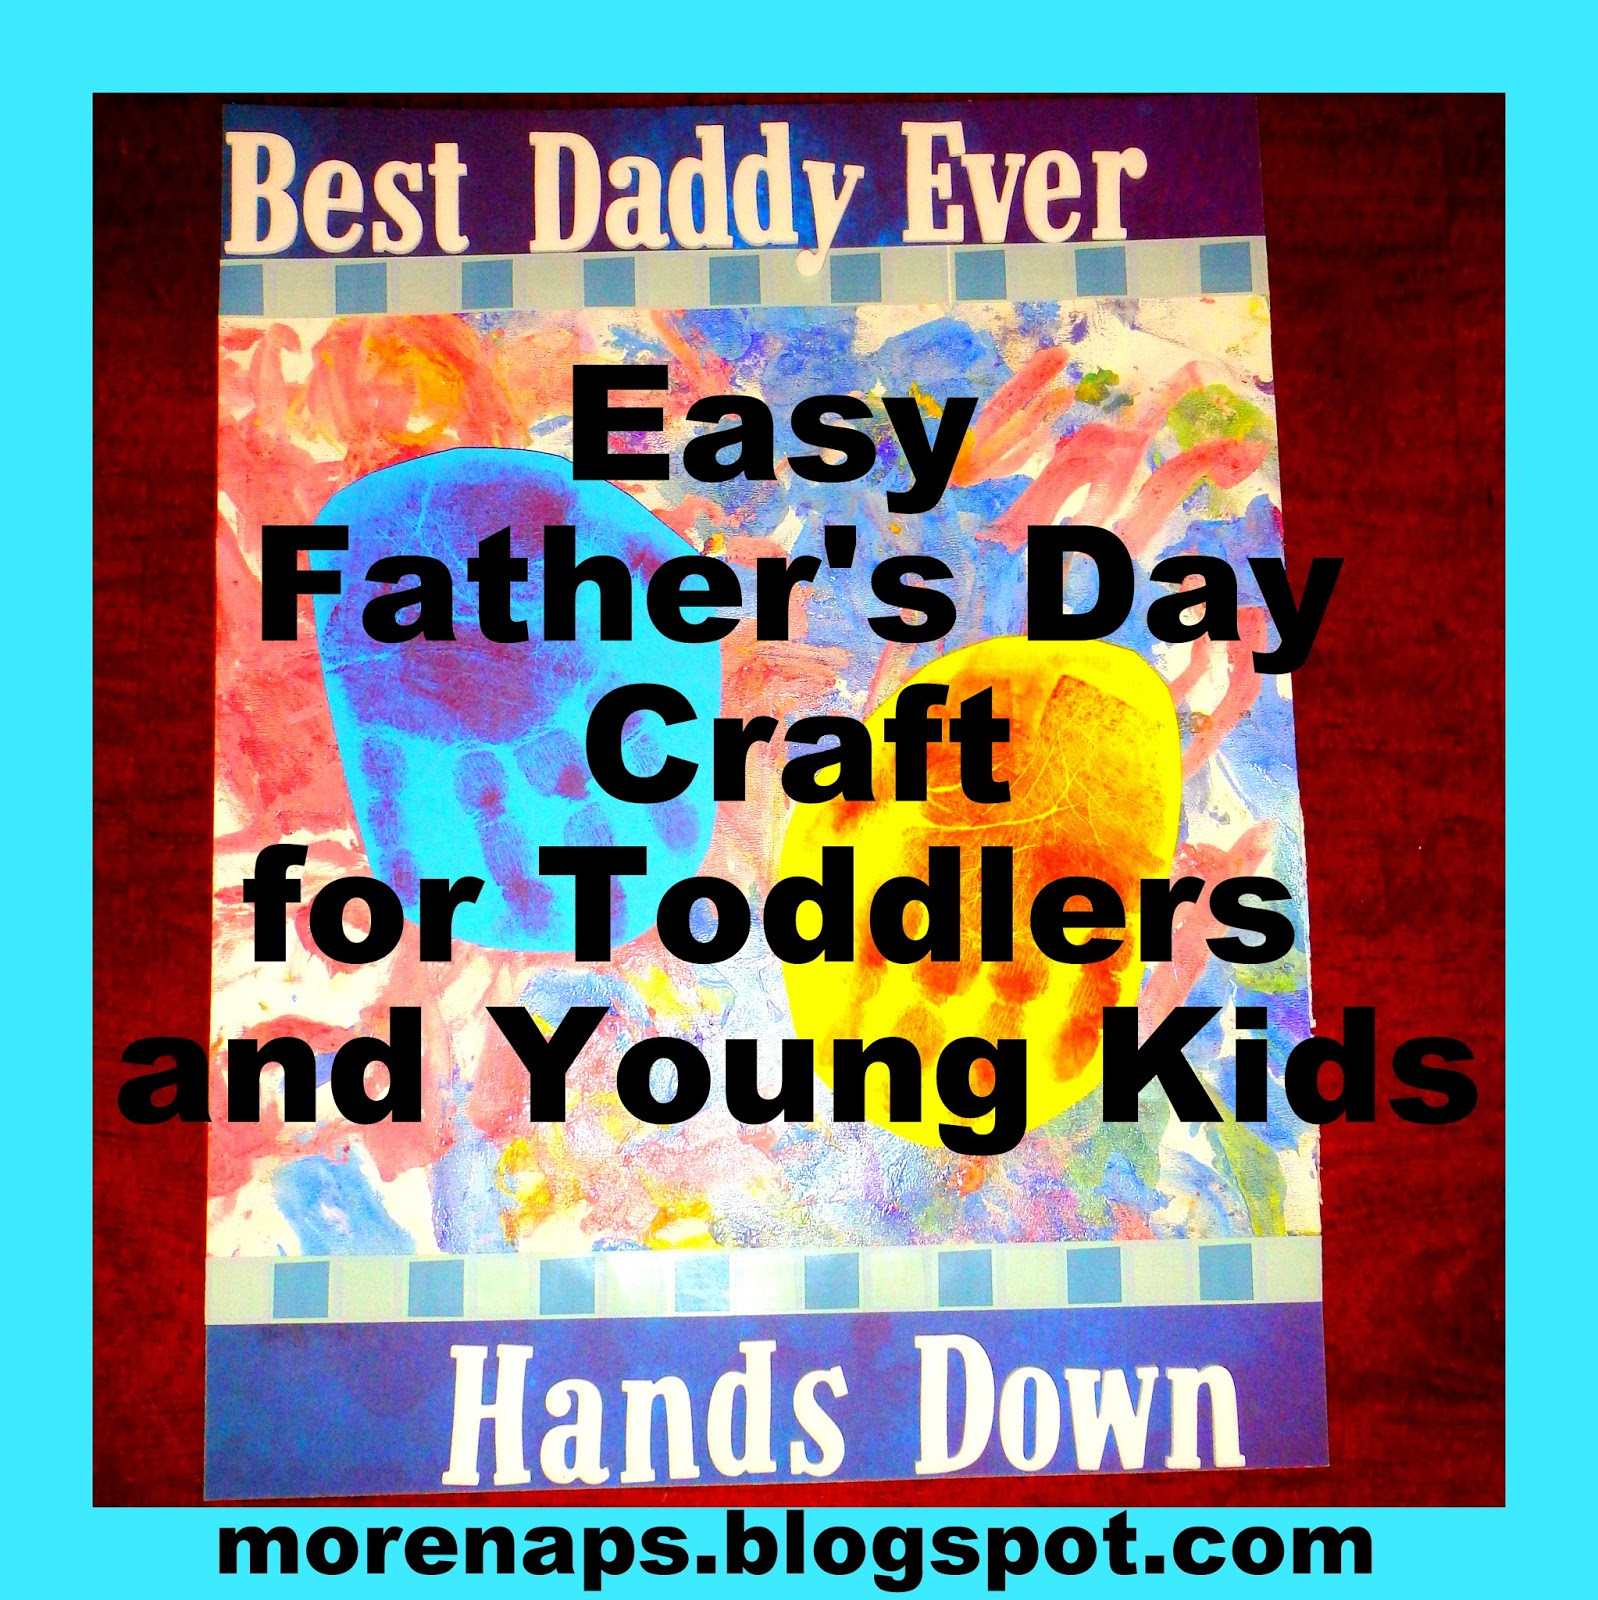 Father'S Day Craft Ideas For Toddlers
 I was promised more naps Easy Father s Day Craft for